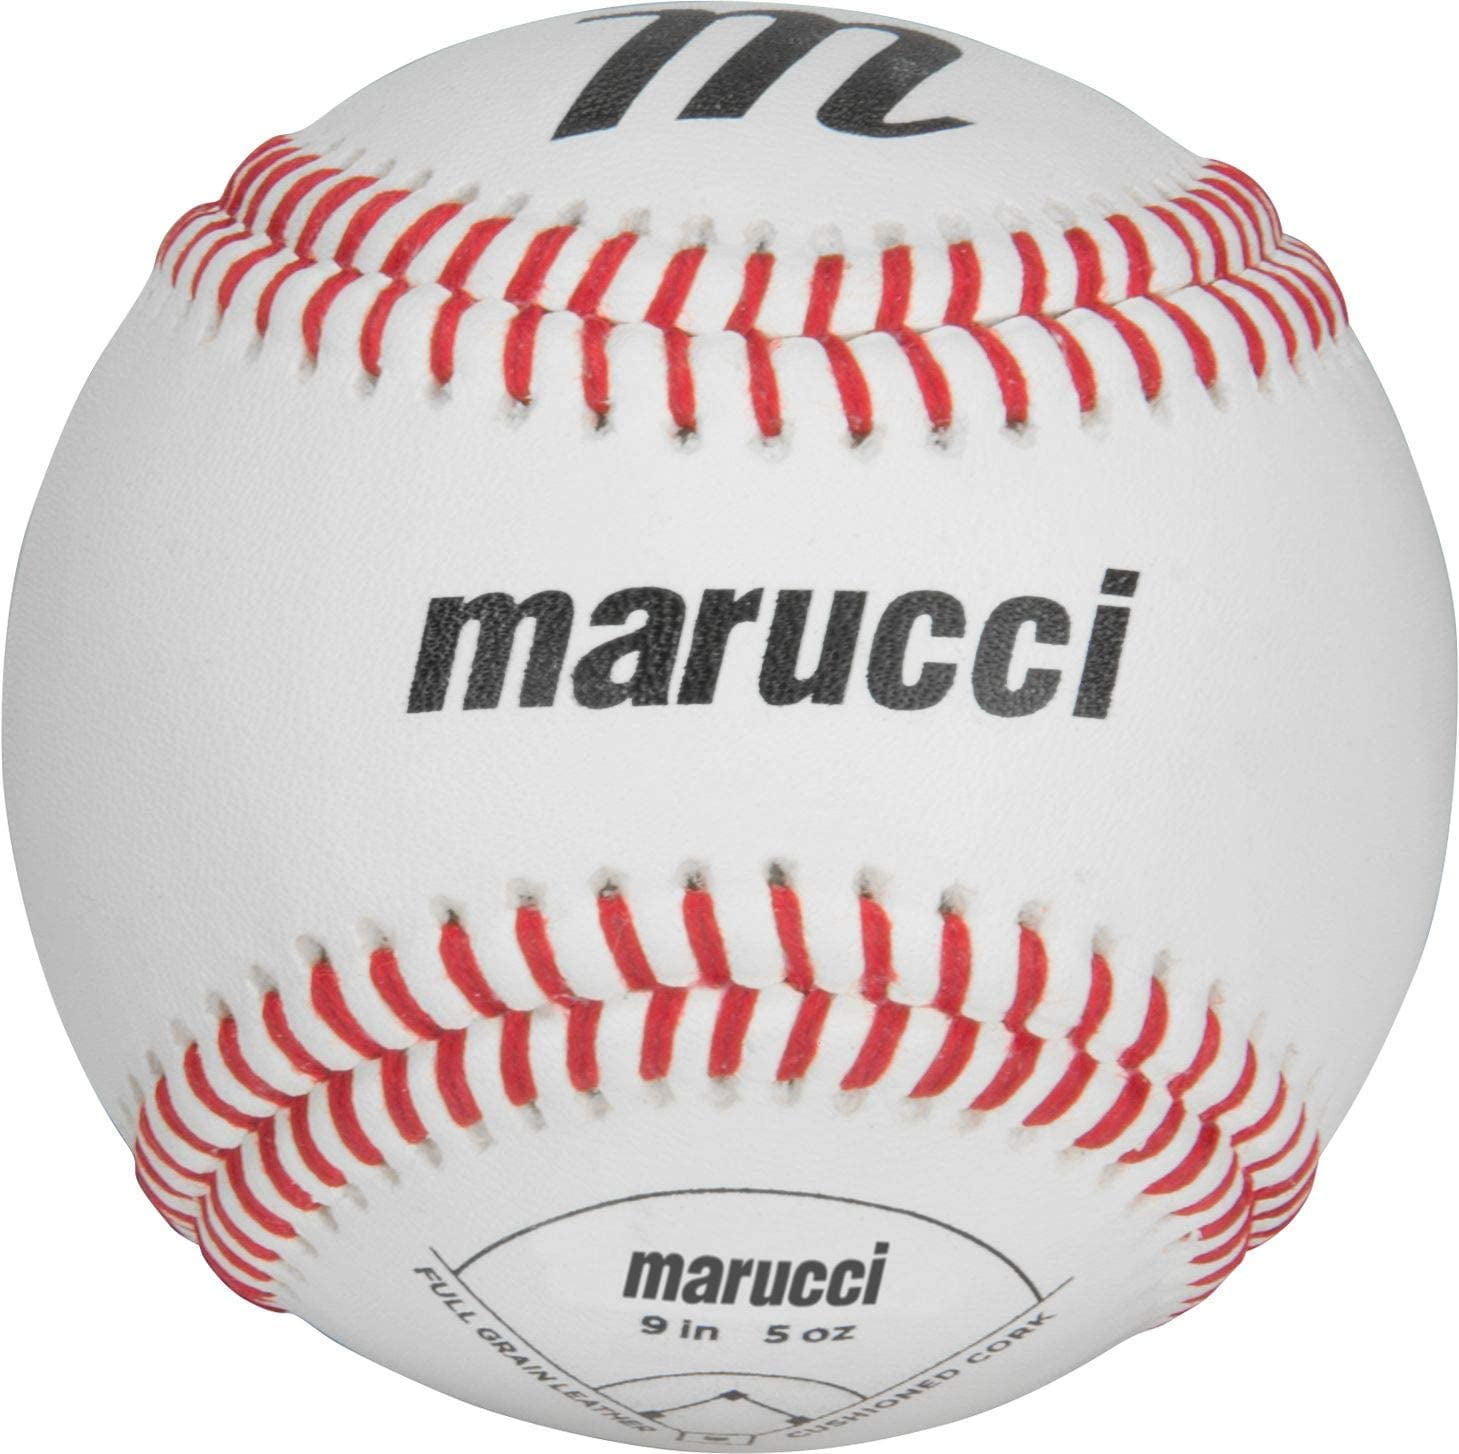 MOBBLP9-12 Pack of 12 Baseballs Adult Official League Game Baseball Marucci Sports